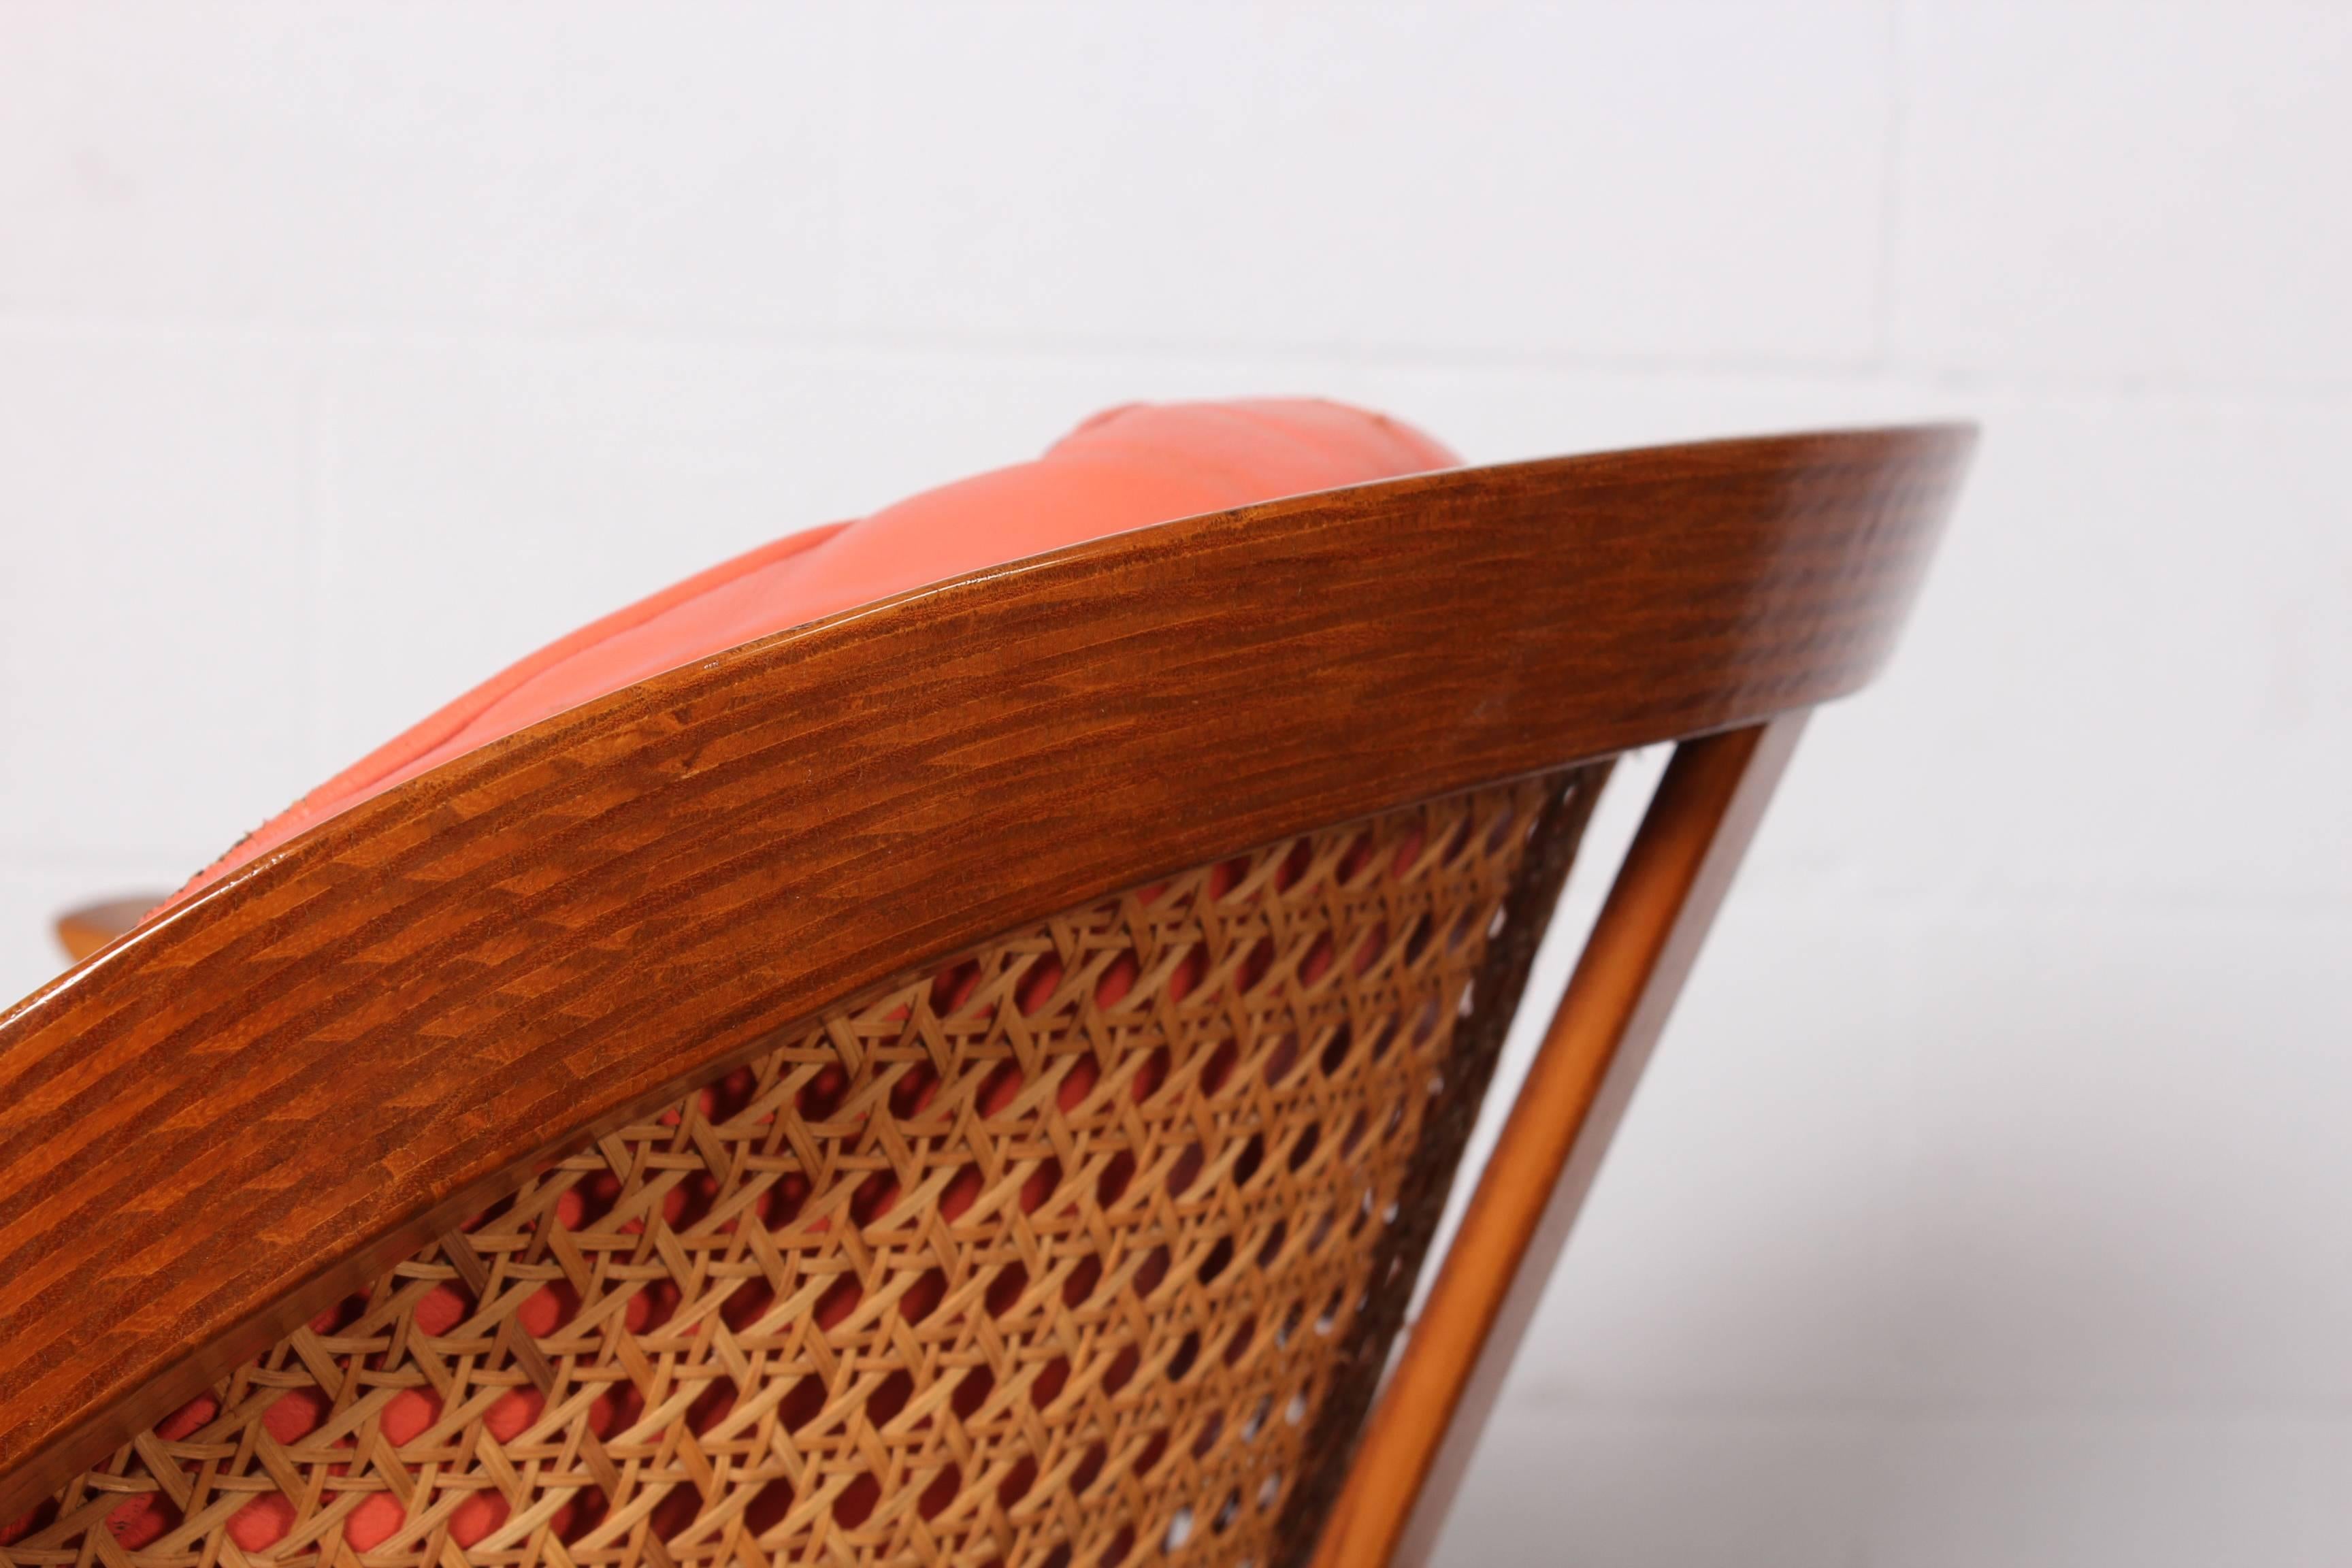 An elegant A-frame lounge chair with original pink leather. Designed by Edward Wormley for Dunbar.